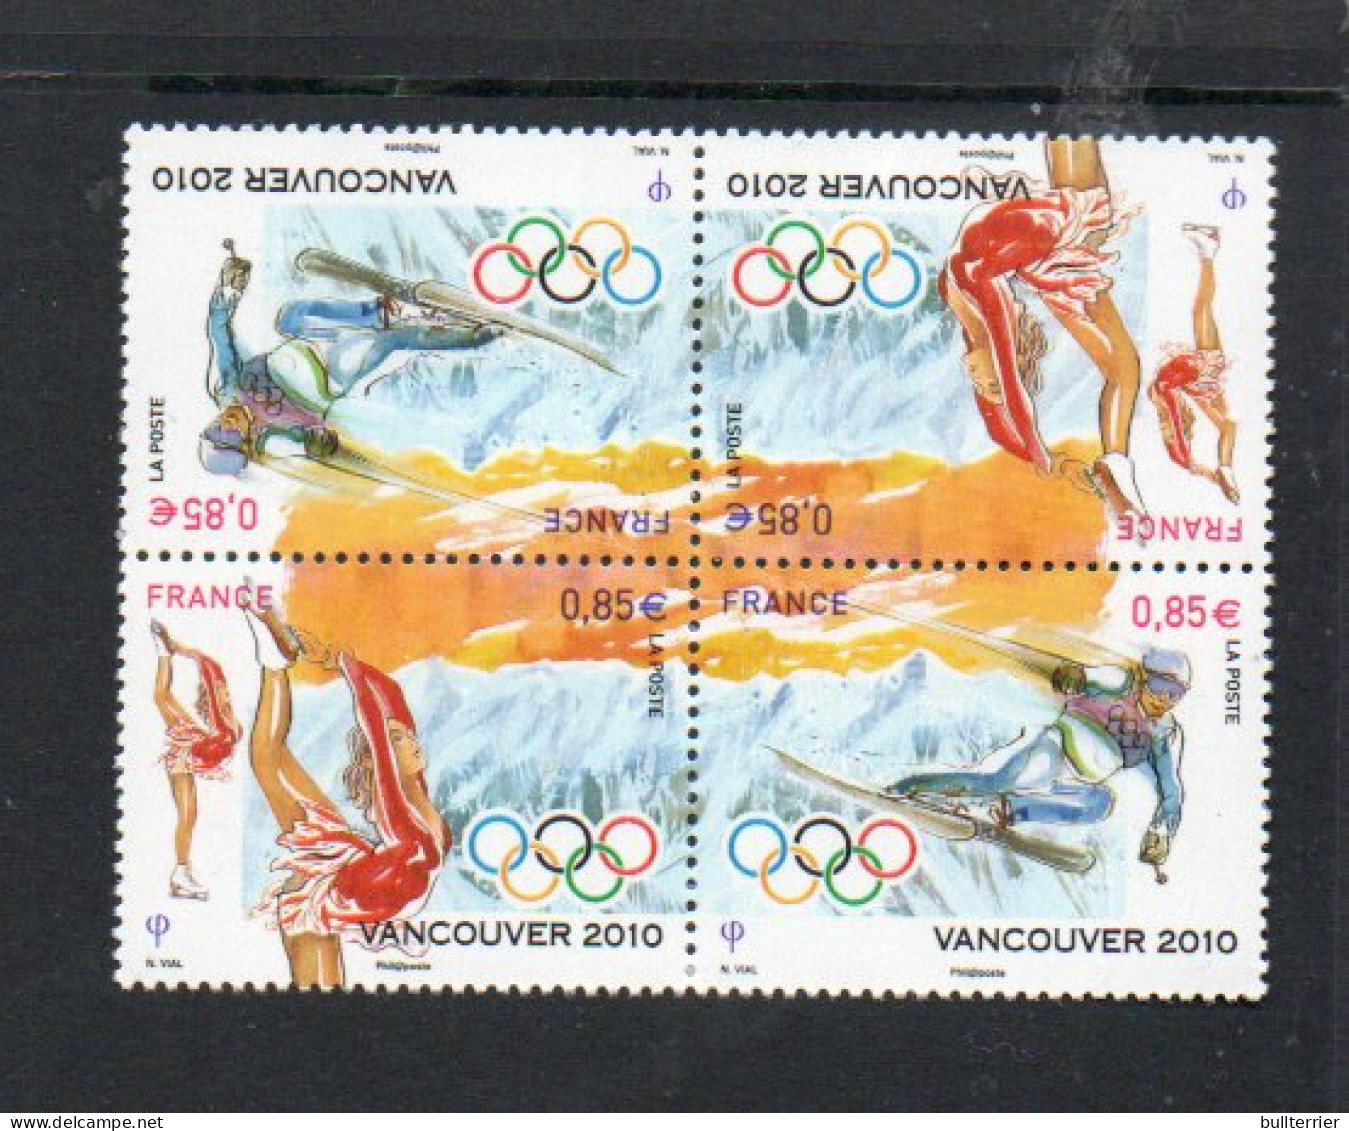 OLYMPICS - FRANCE -2010- VANCOUVER OLYMPCIS SET OF 2 IN SE TENANT BLOCK OF 4  MINT NEVER HINGED  SG CAT £16 - Hiver 2010: Vancouver